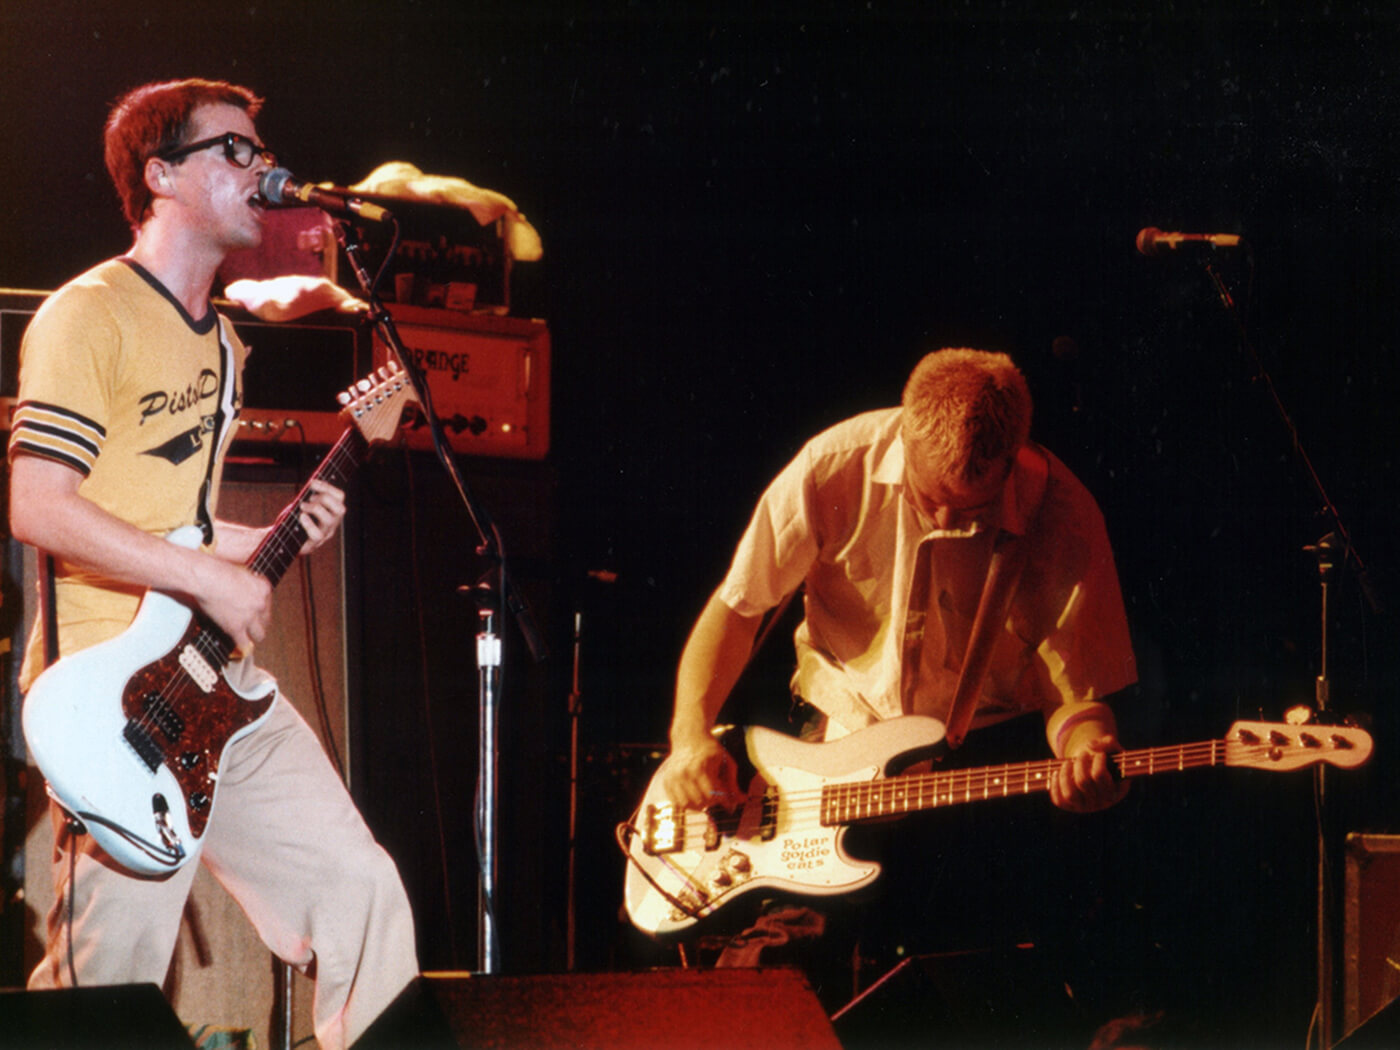 Rivers Cuomo of Weezer plays his iconic blue Stratocaster with bassist Matt Sharp in 1994, photo by Jim Steinfeldt/Michael Ochs Archives via Getty Images